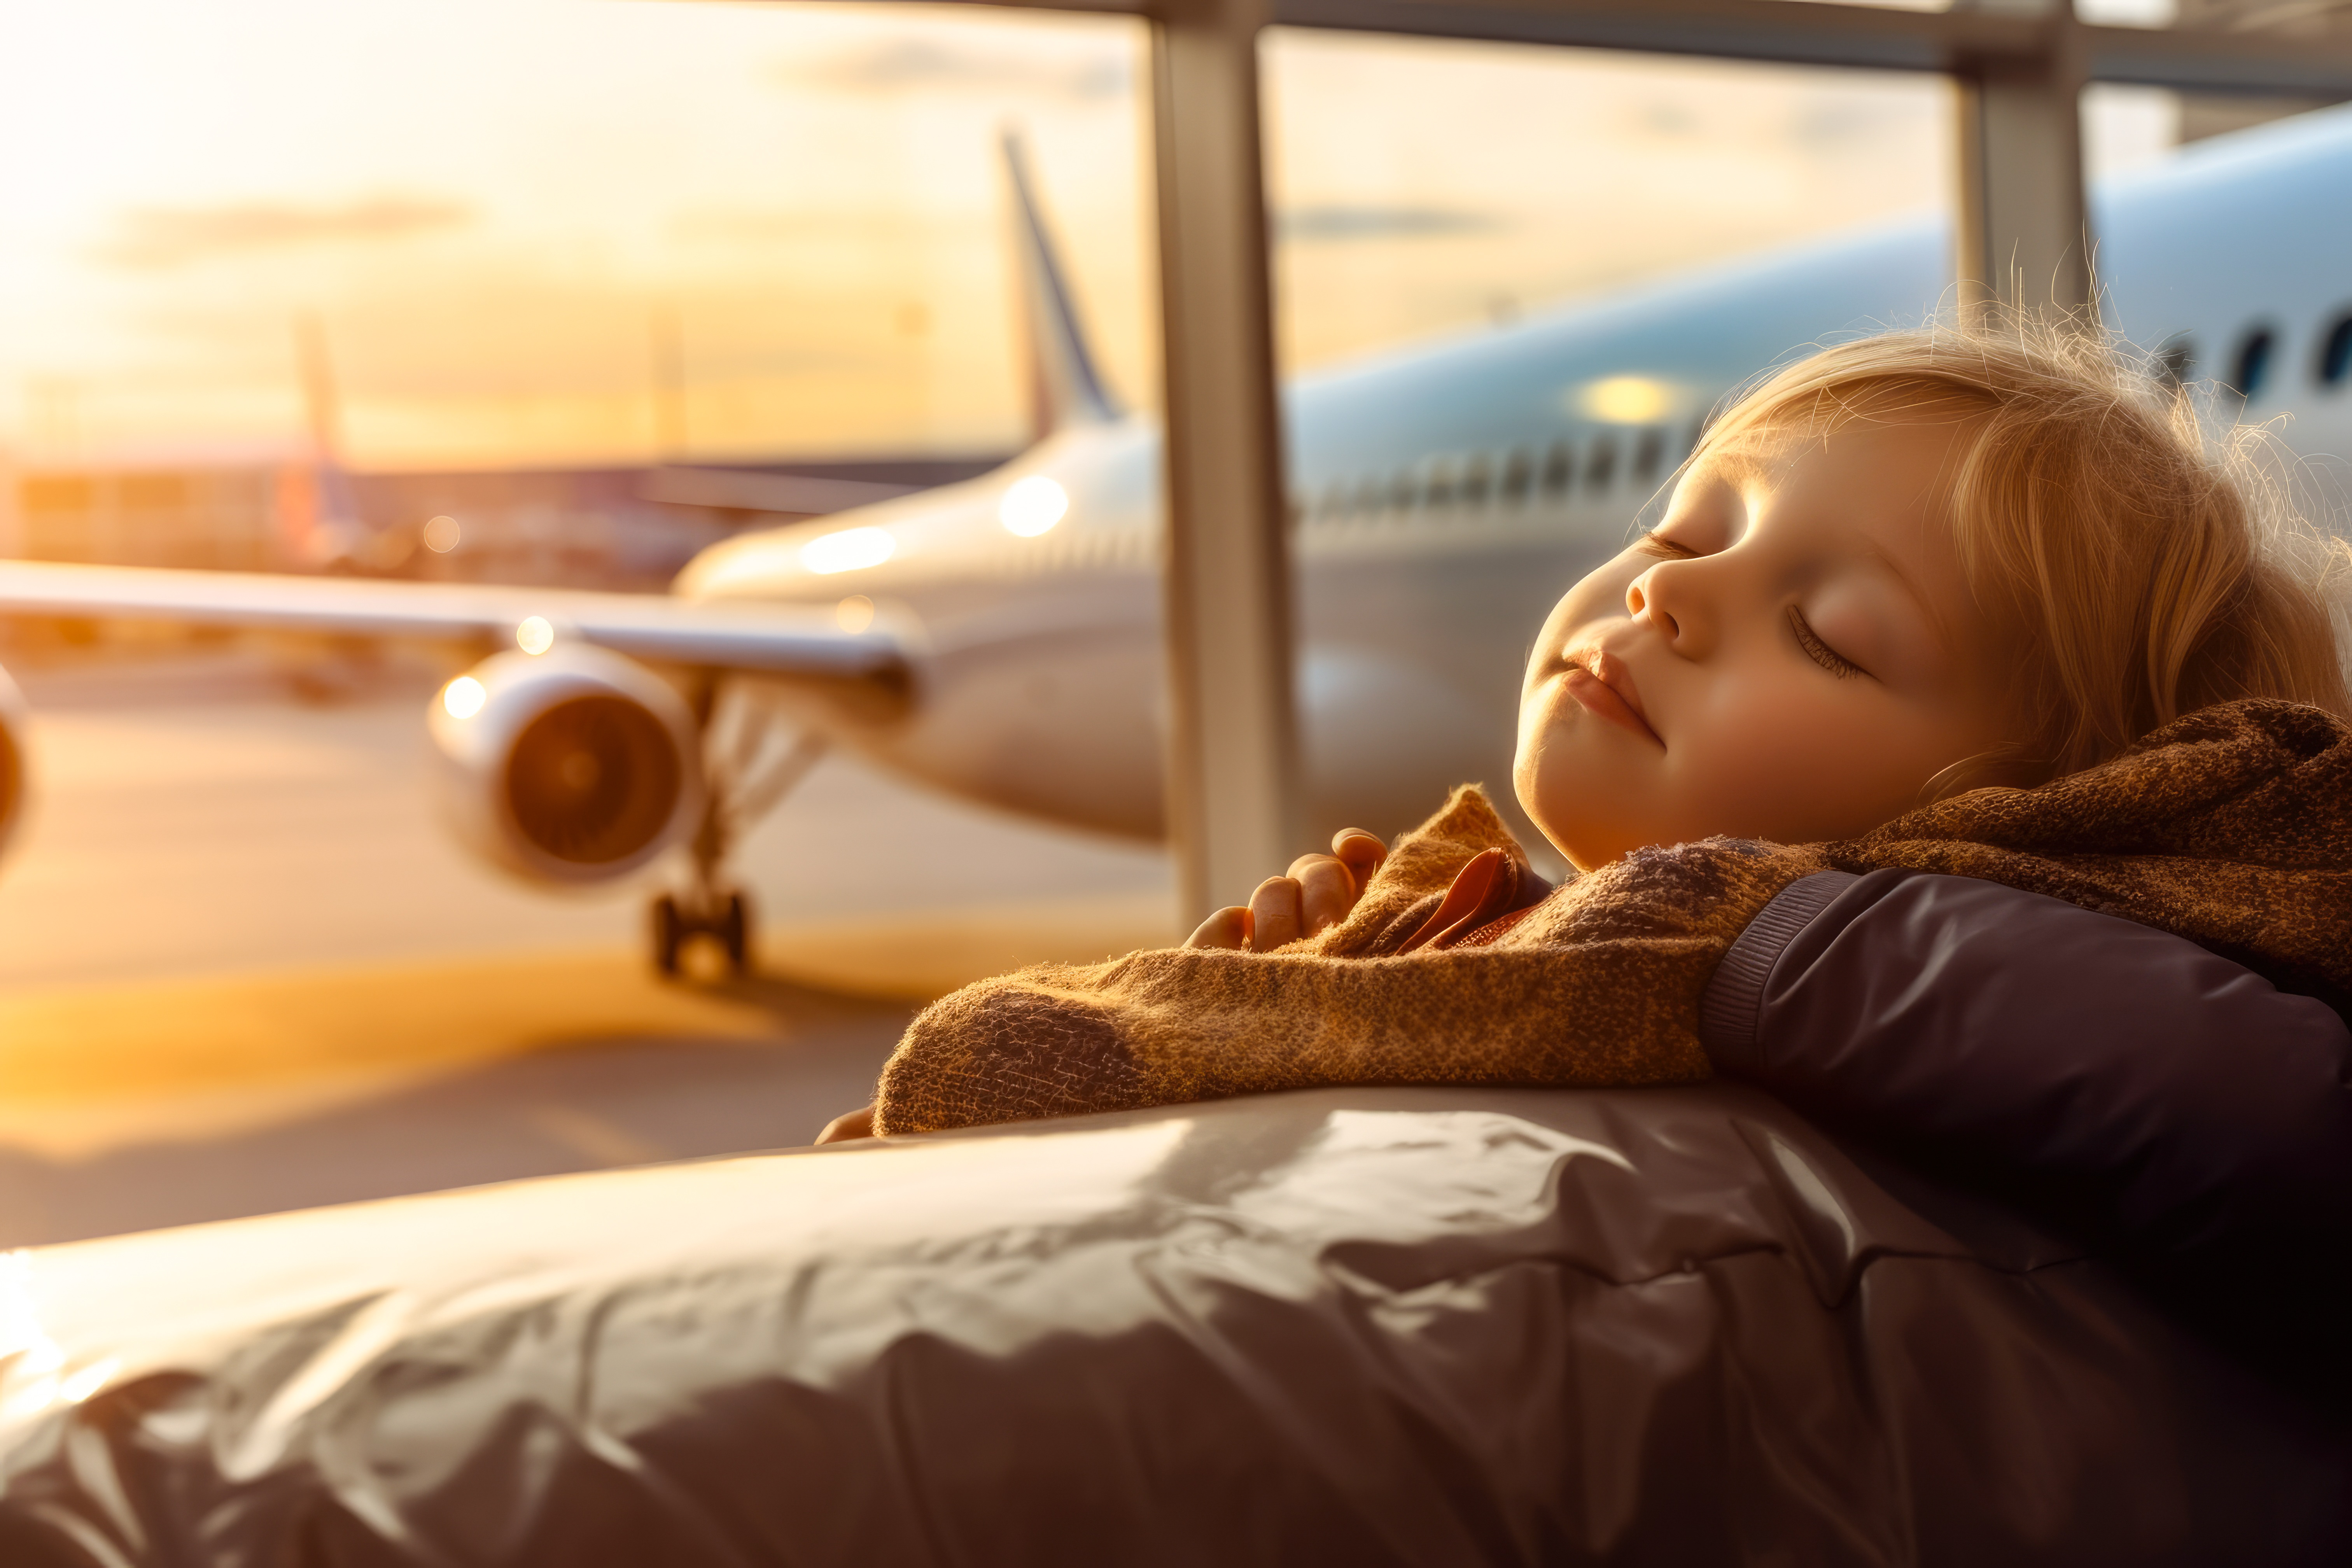 A little girl asleep in an airport with a plan parked up outside which is visible through the window in the twilight